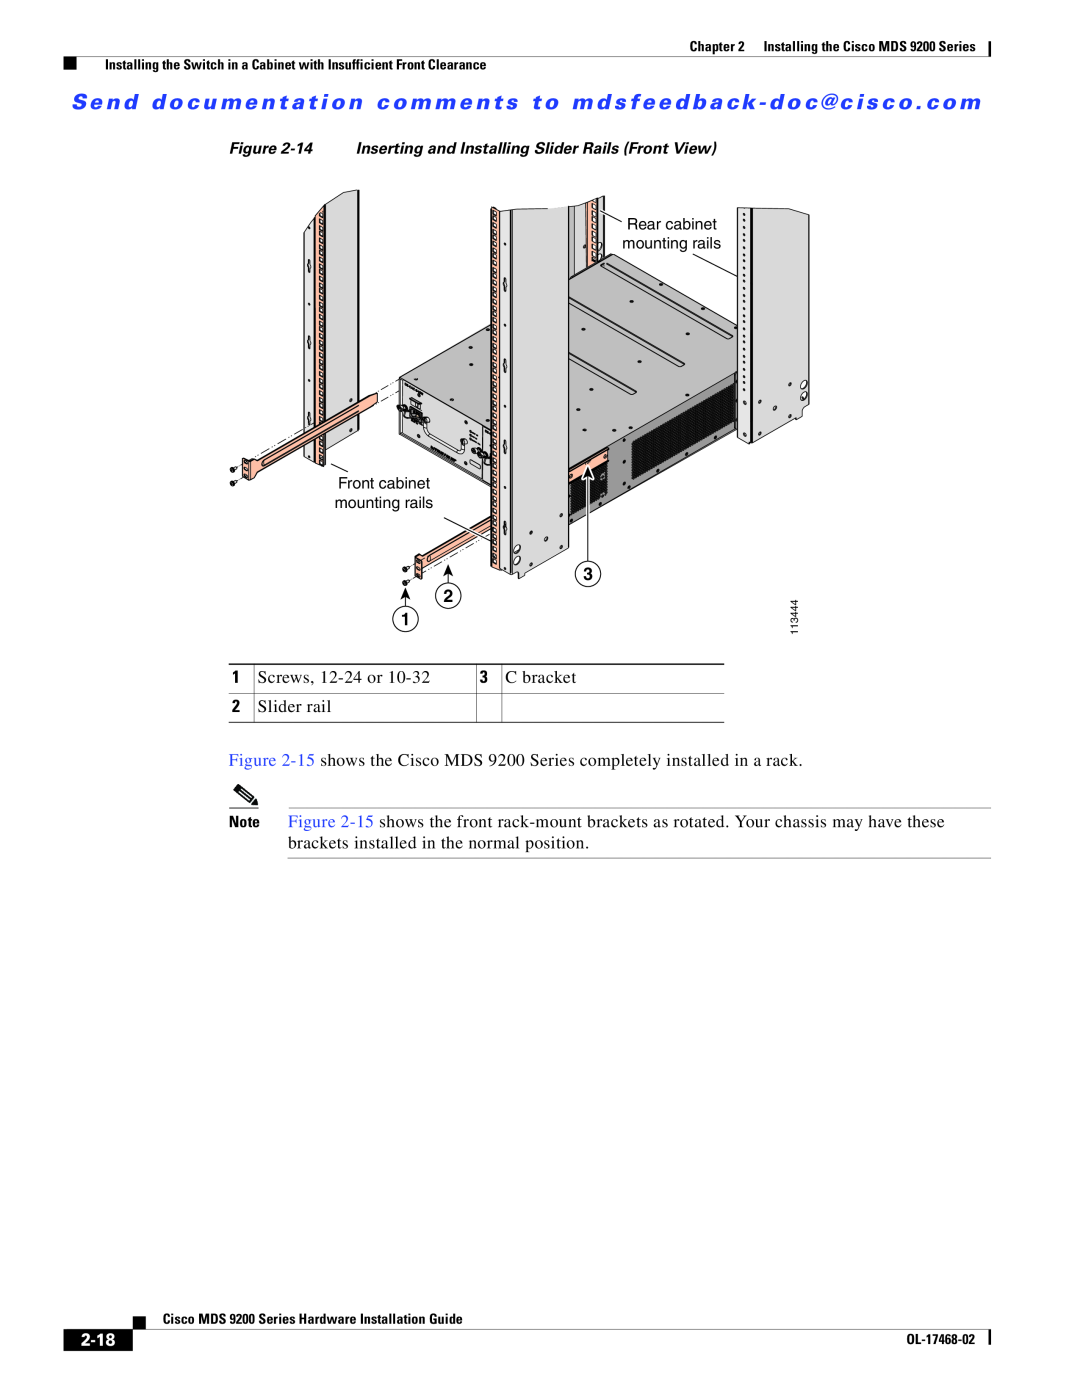 Cisco Systems MDS 9200 Series manual 2-18, 14 Inserting and Installing Slider Rails Front View 